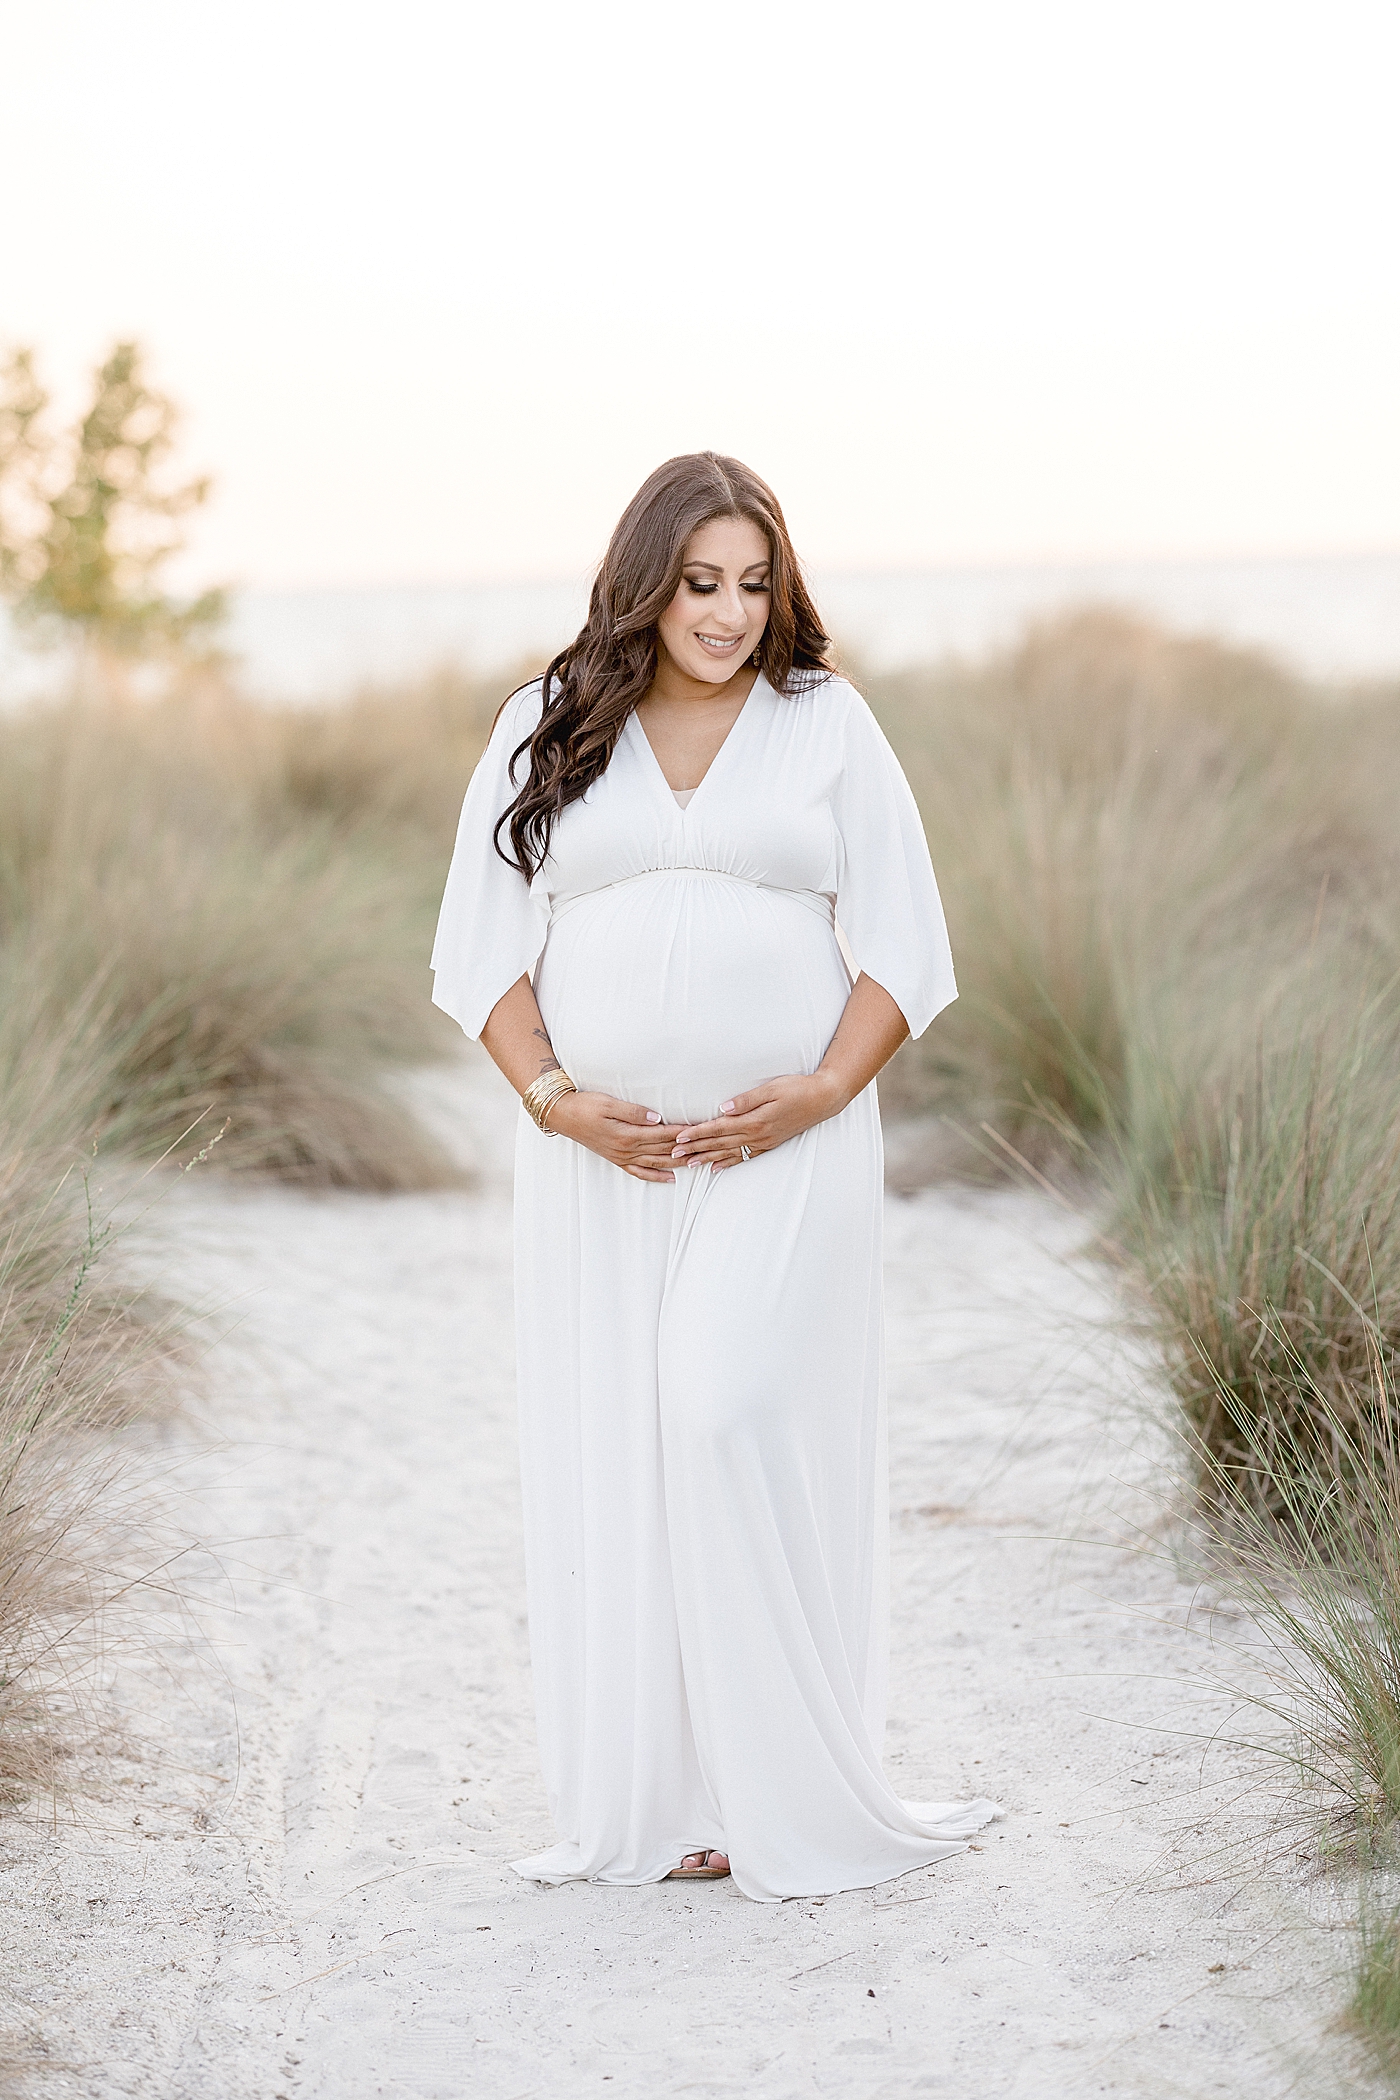 Sunset maternity session at Cypress Point Park. Photo by Brittany Elise Photography.